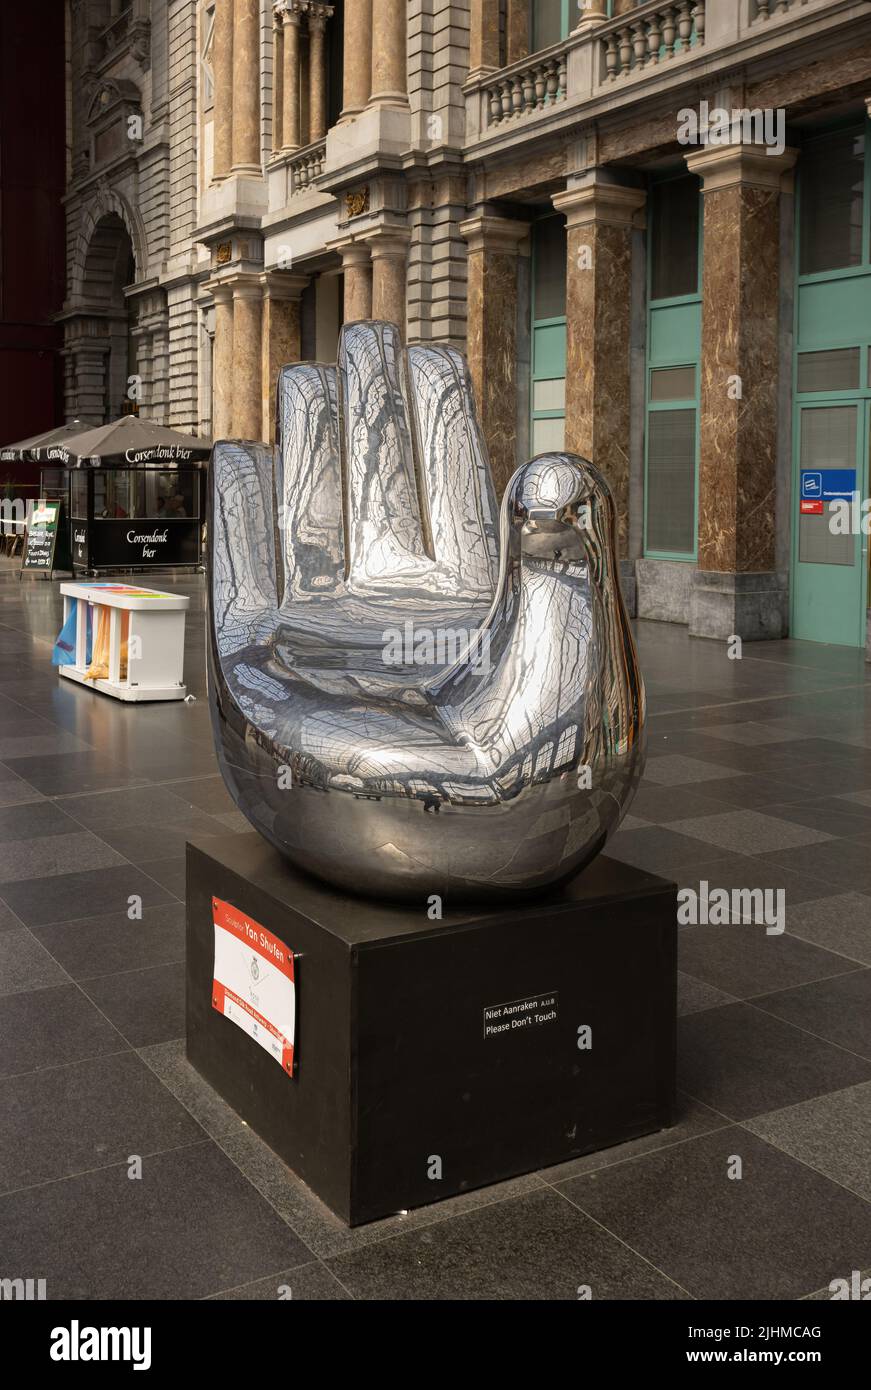 Hand of peace sculpture by Chinese born artist Yan shufen at Antwerp railway station. The symbol of hand and dove at Antwerp Central Station in Belgiu Stock Photo